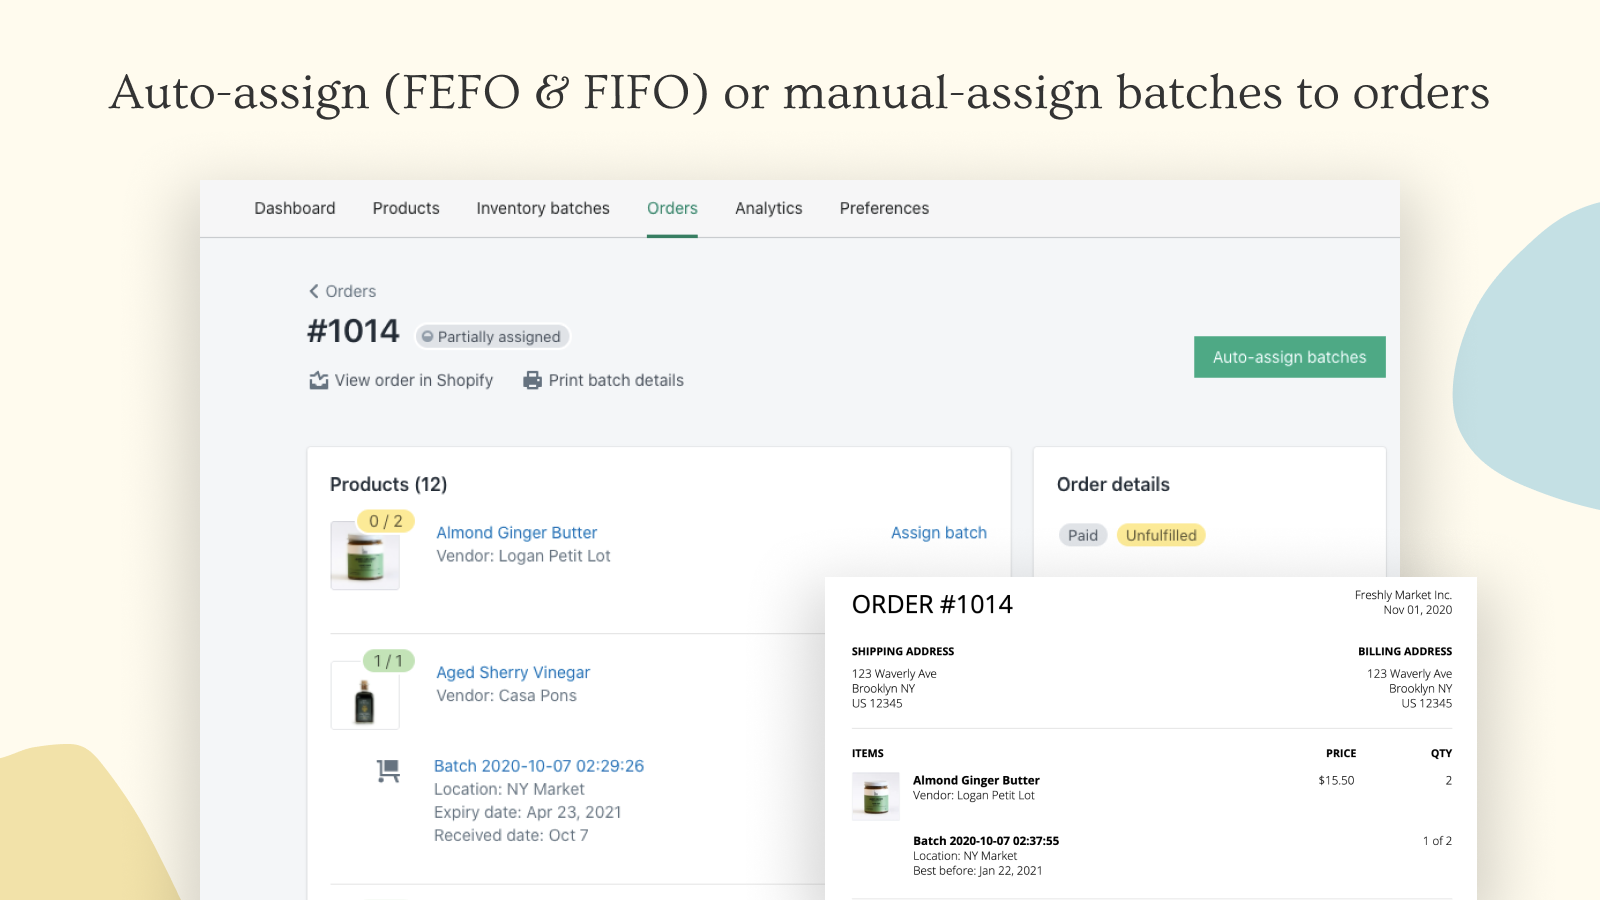 Auto-assign (FEFO & FIFO) or manual-assign batches to orders